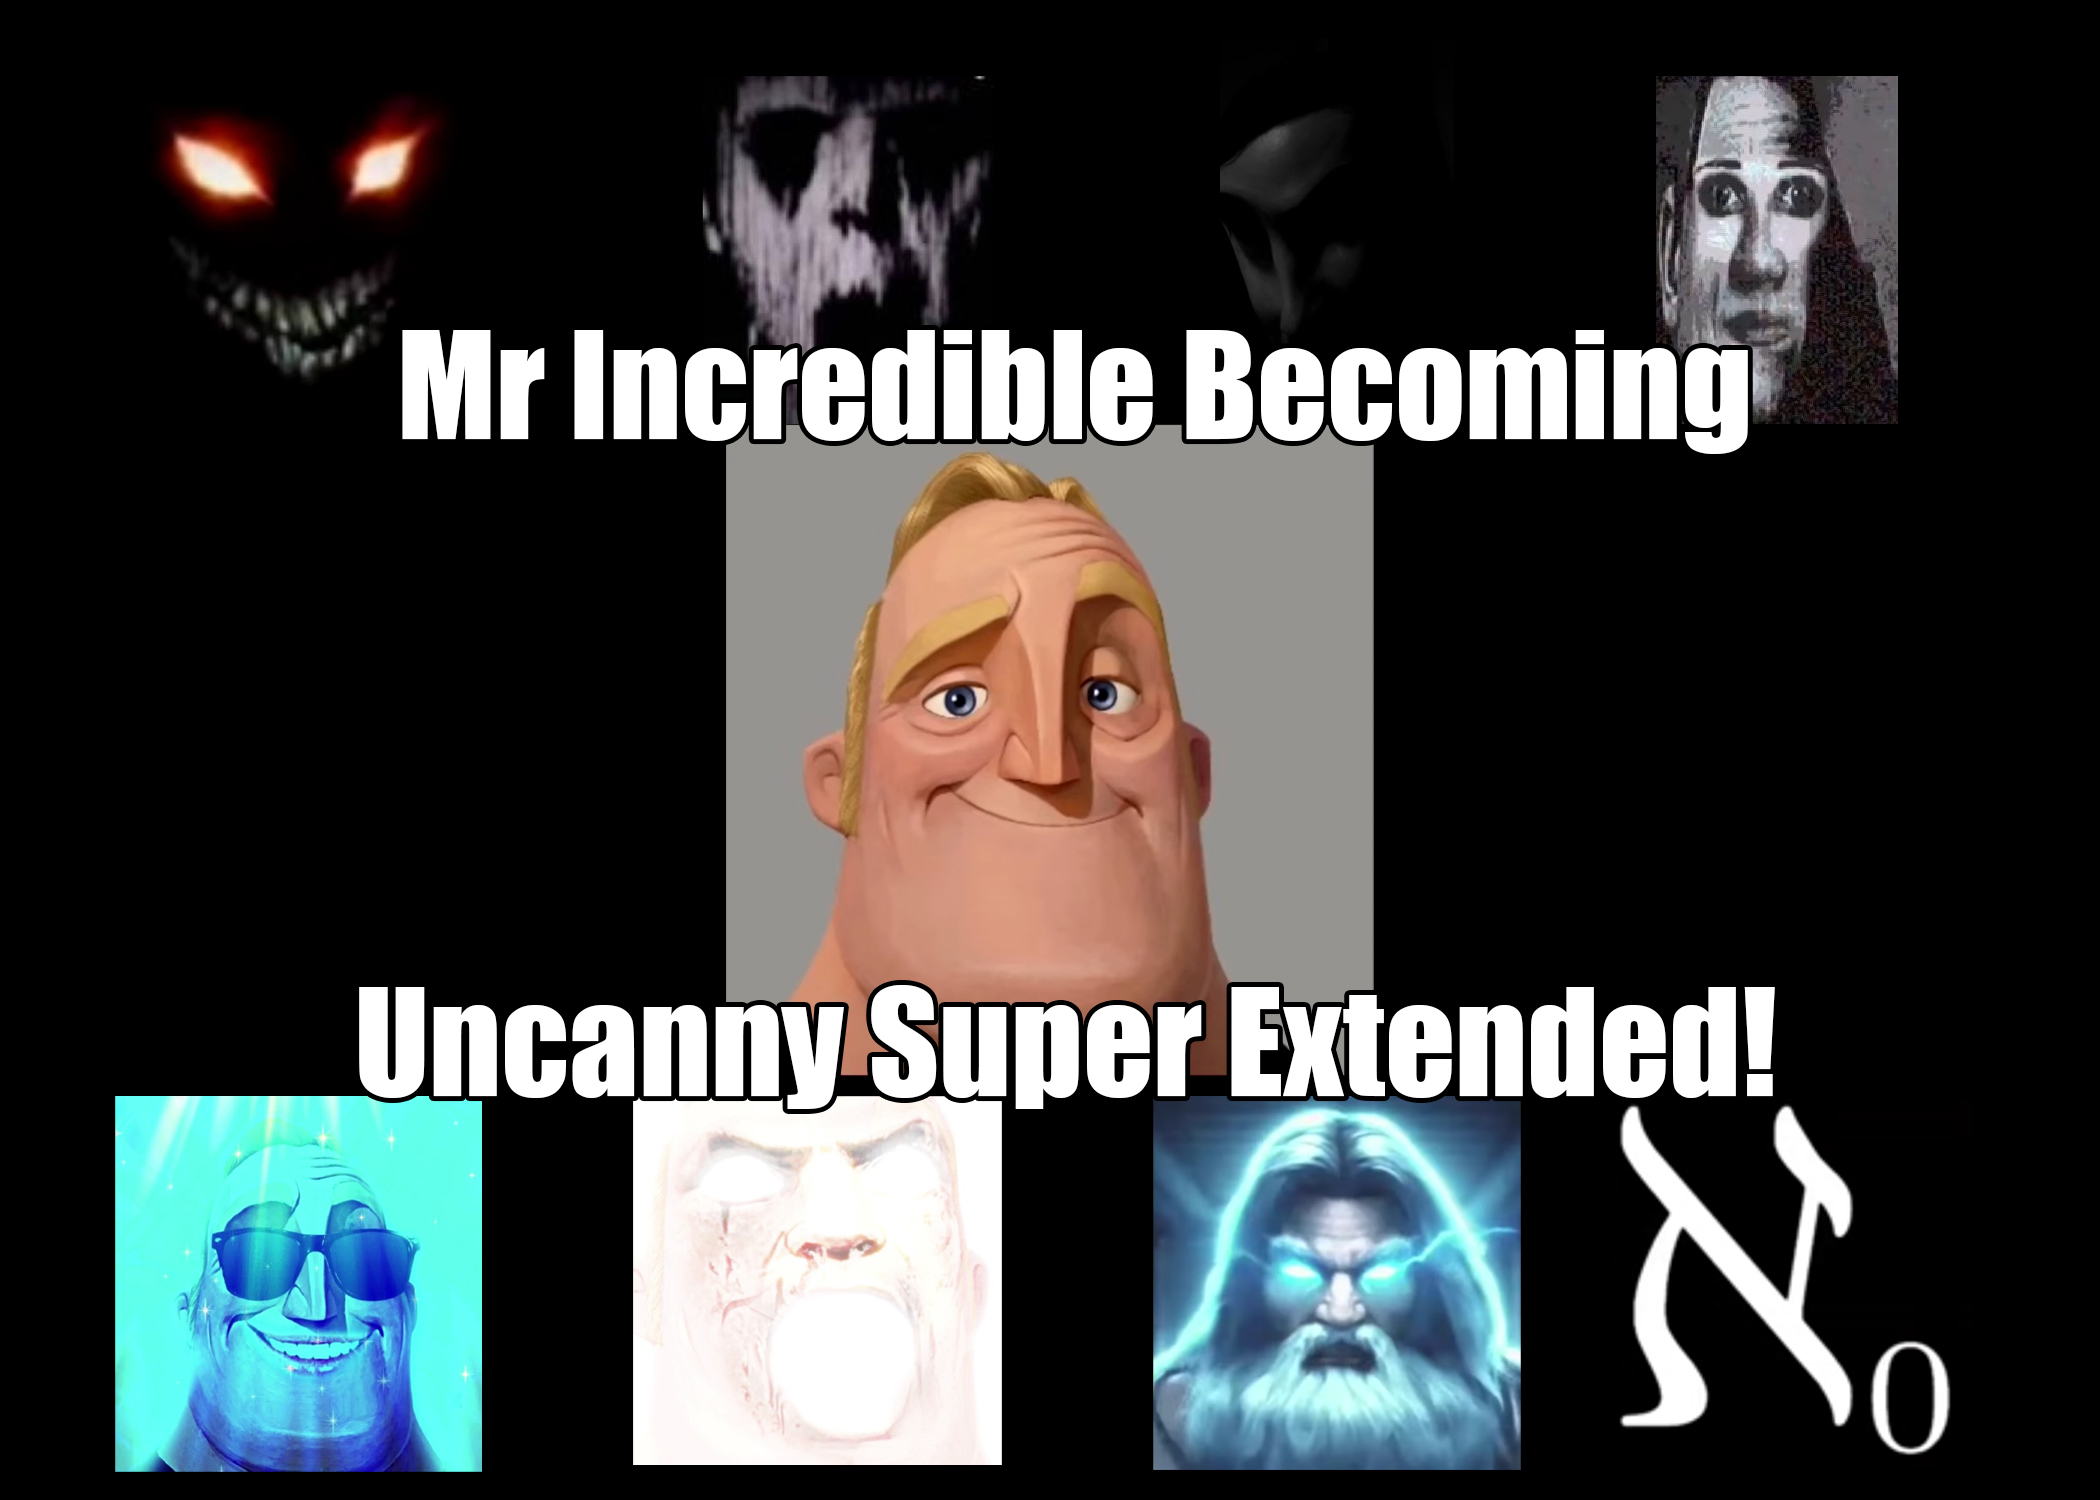 Mr incredible uncanny by ThemMemer Sound Effect - Meme Button - Tuna